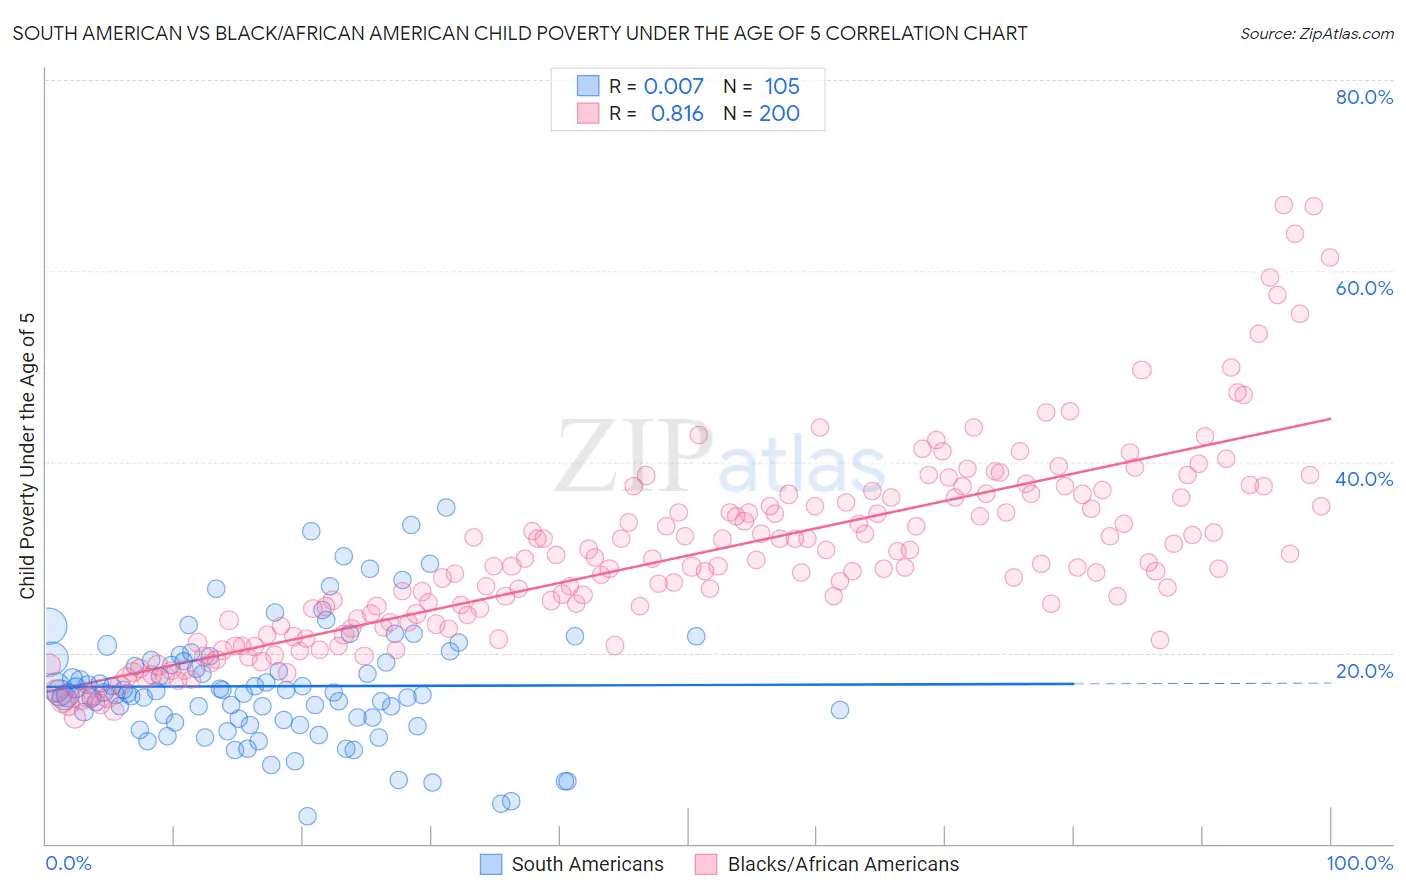 South American vs Black/African American Child Poverty Under the Age of 5